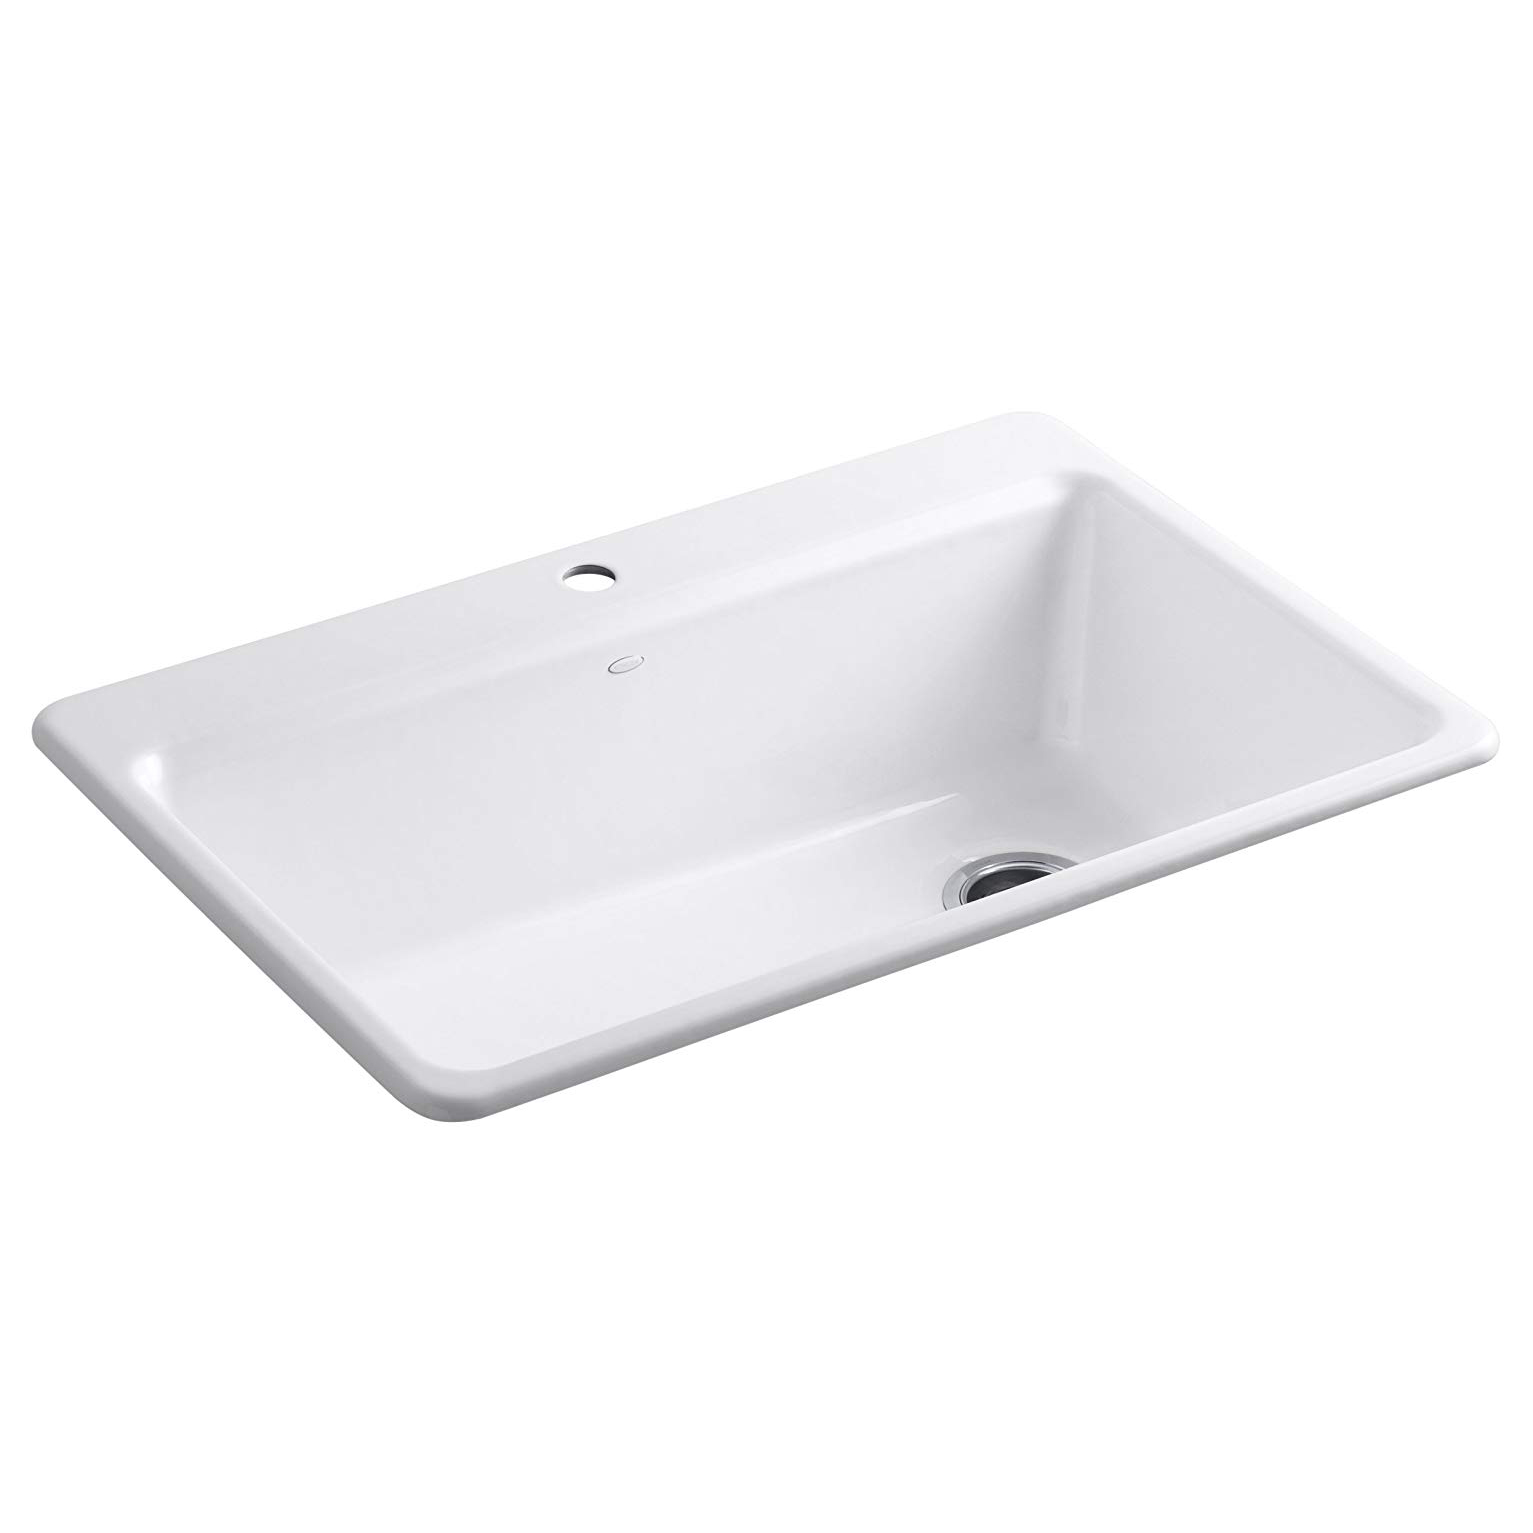 Riverby 33x22x9-5/8" Double Bowl Sink Kit in White w/1 Hole